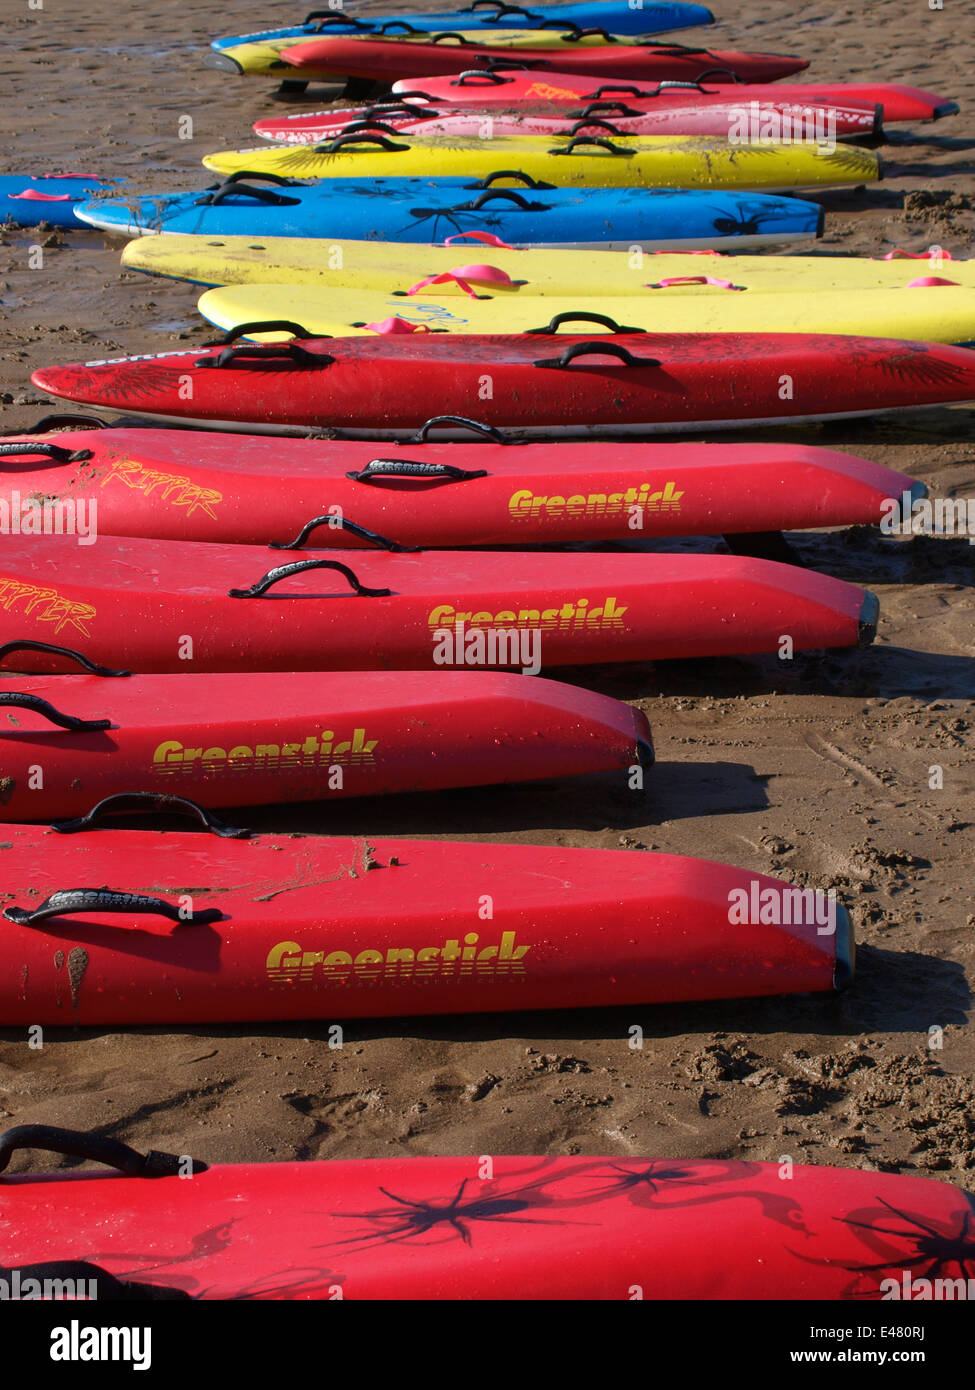 Surf rescue boards on the beach, Bude, Cornwall, UK Stock Photo